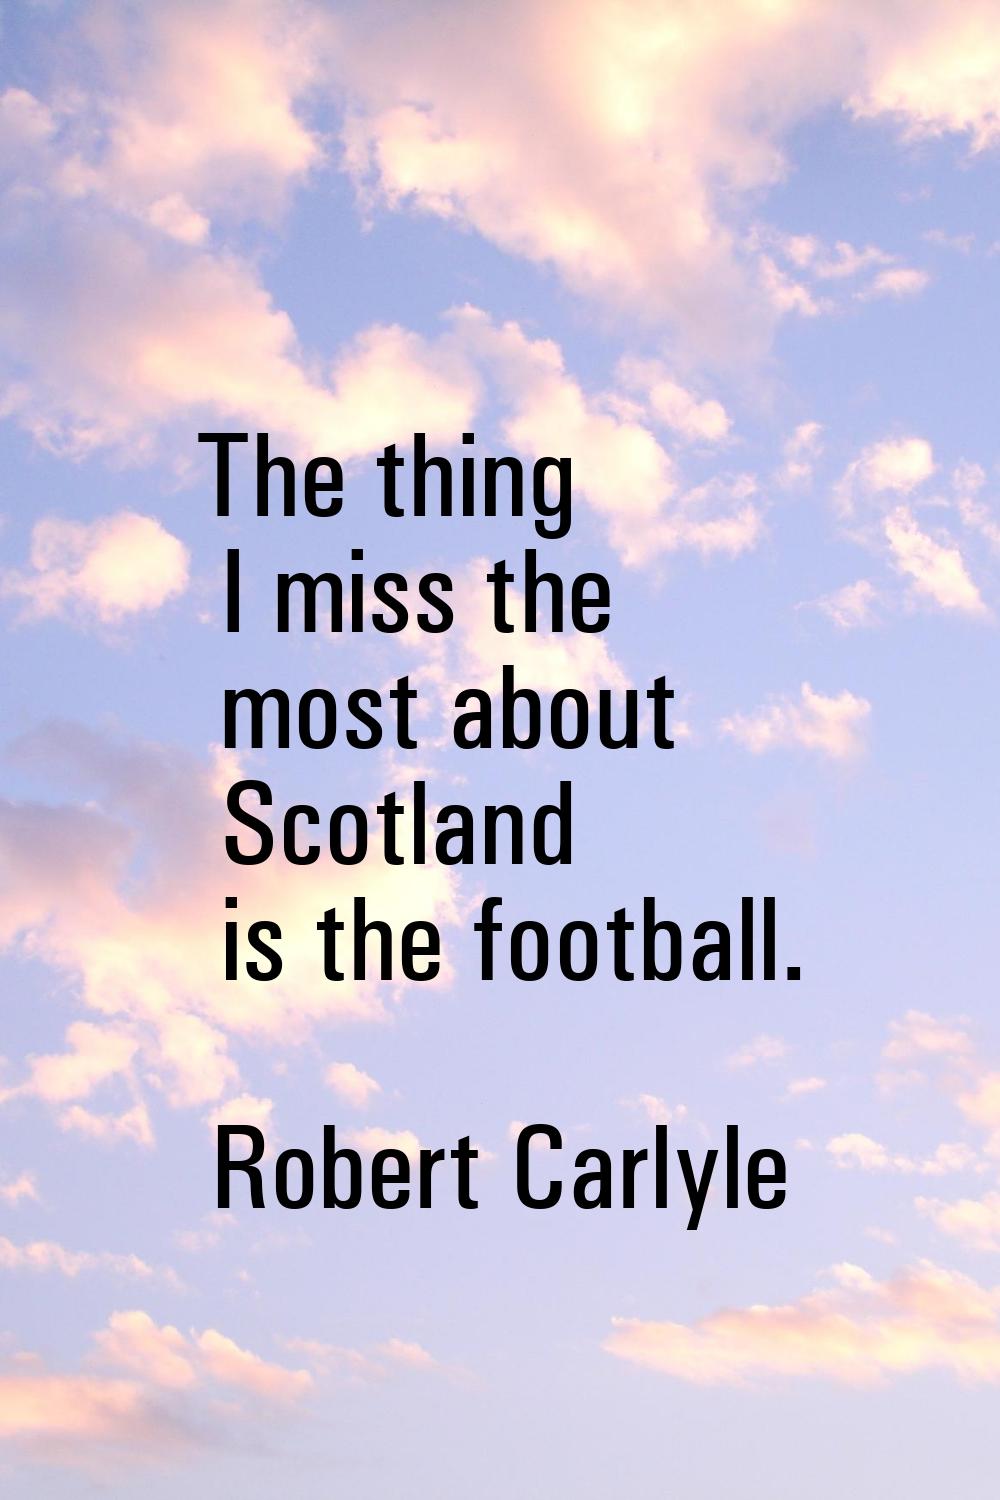 The thing I miss the most about Scotland is the football.